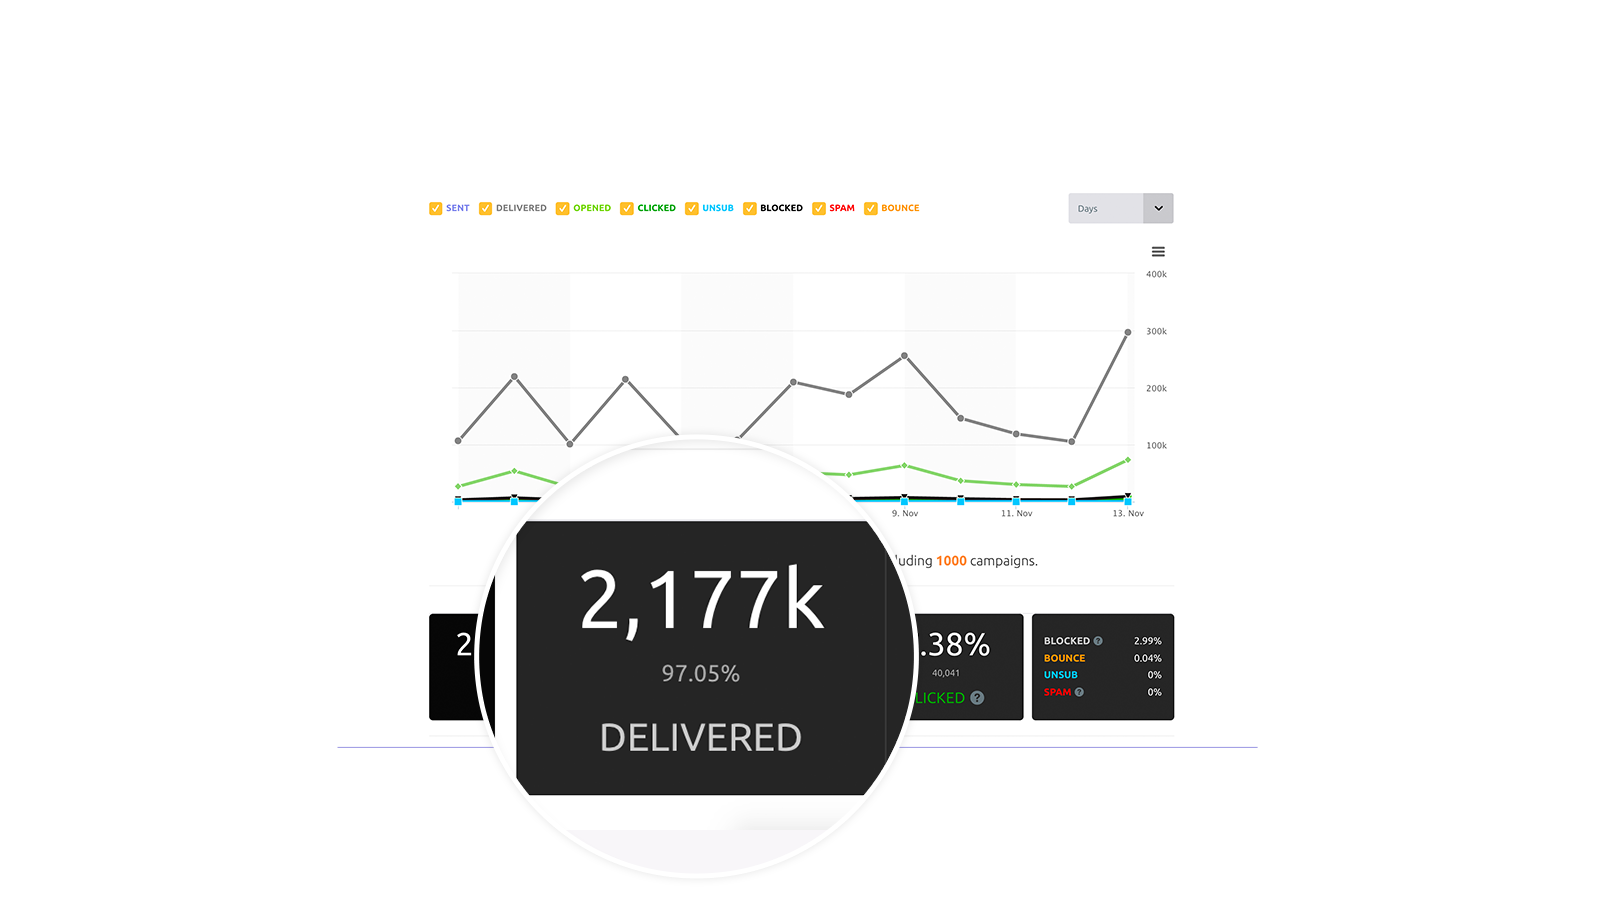 Mailjet Software - Powerful Analytics Reporting In Real-Time